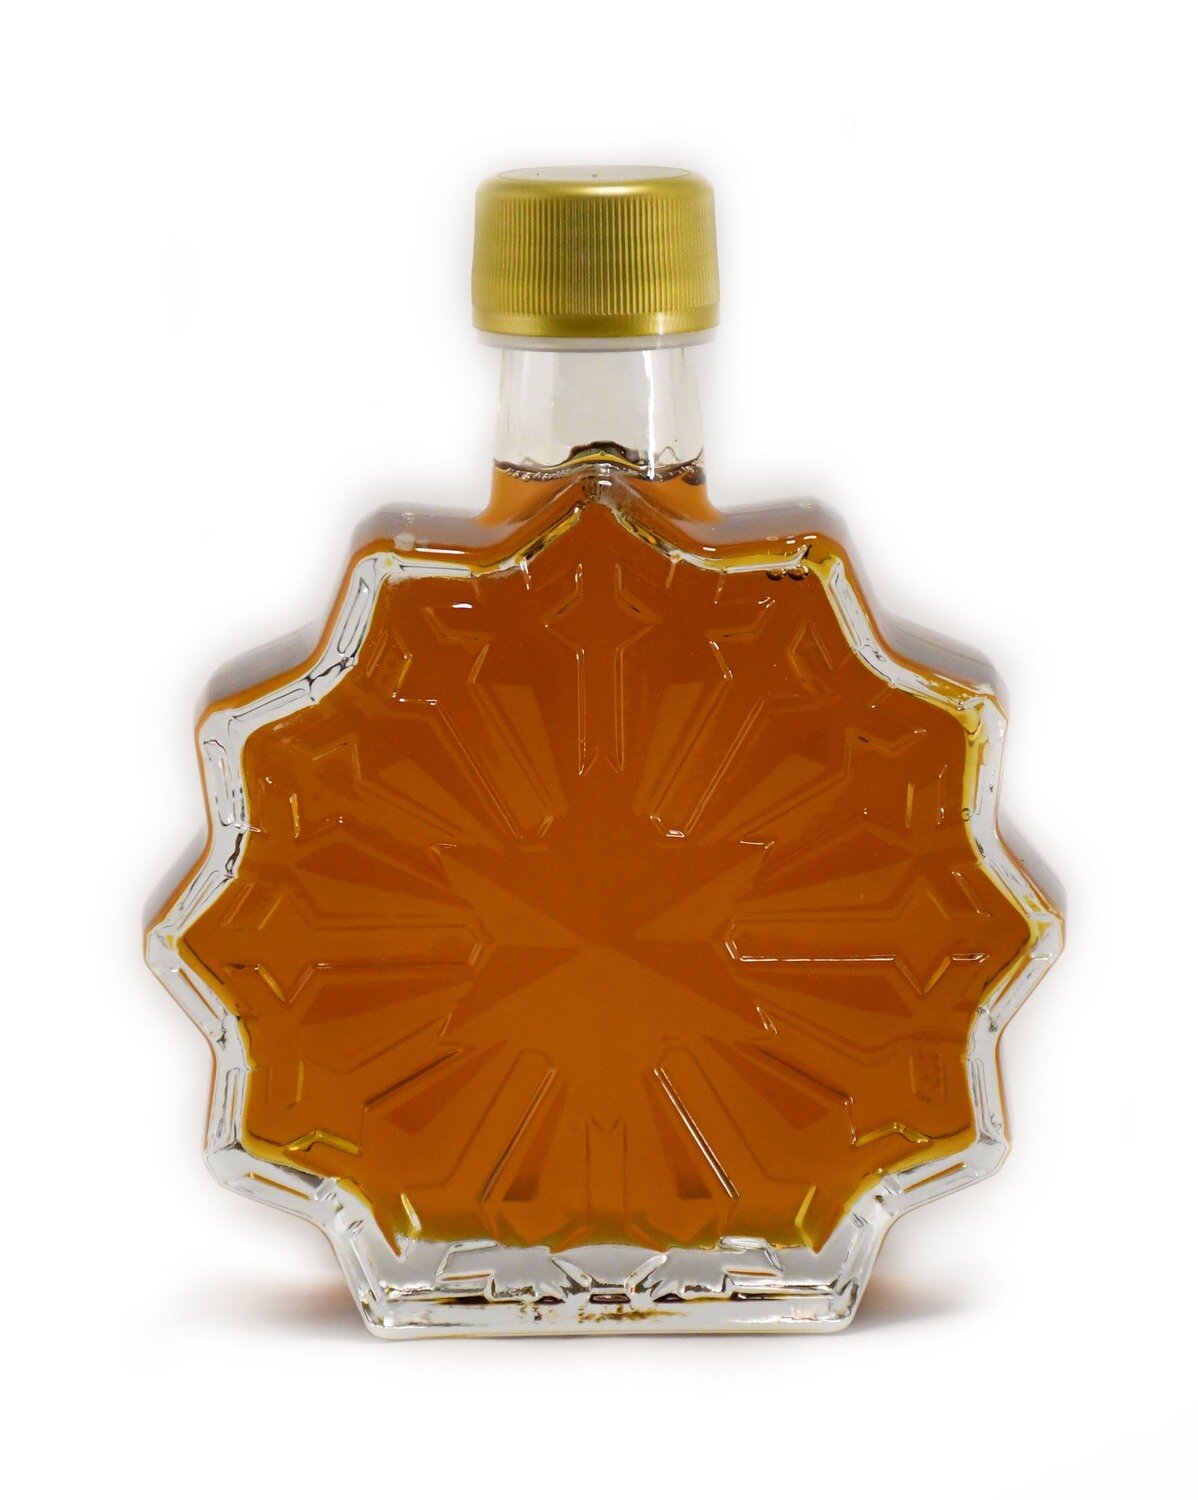 Giffin's Maple Products - Snowflake Amber Maple Syrup 250ml